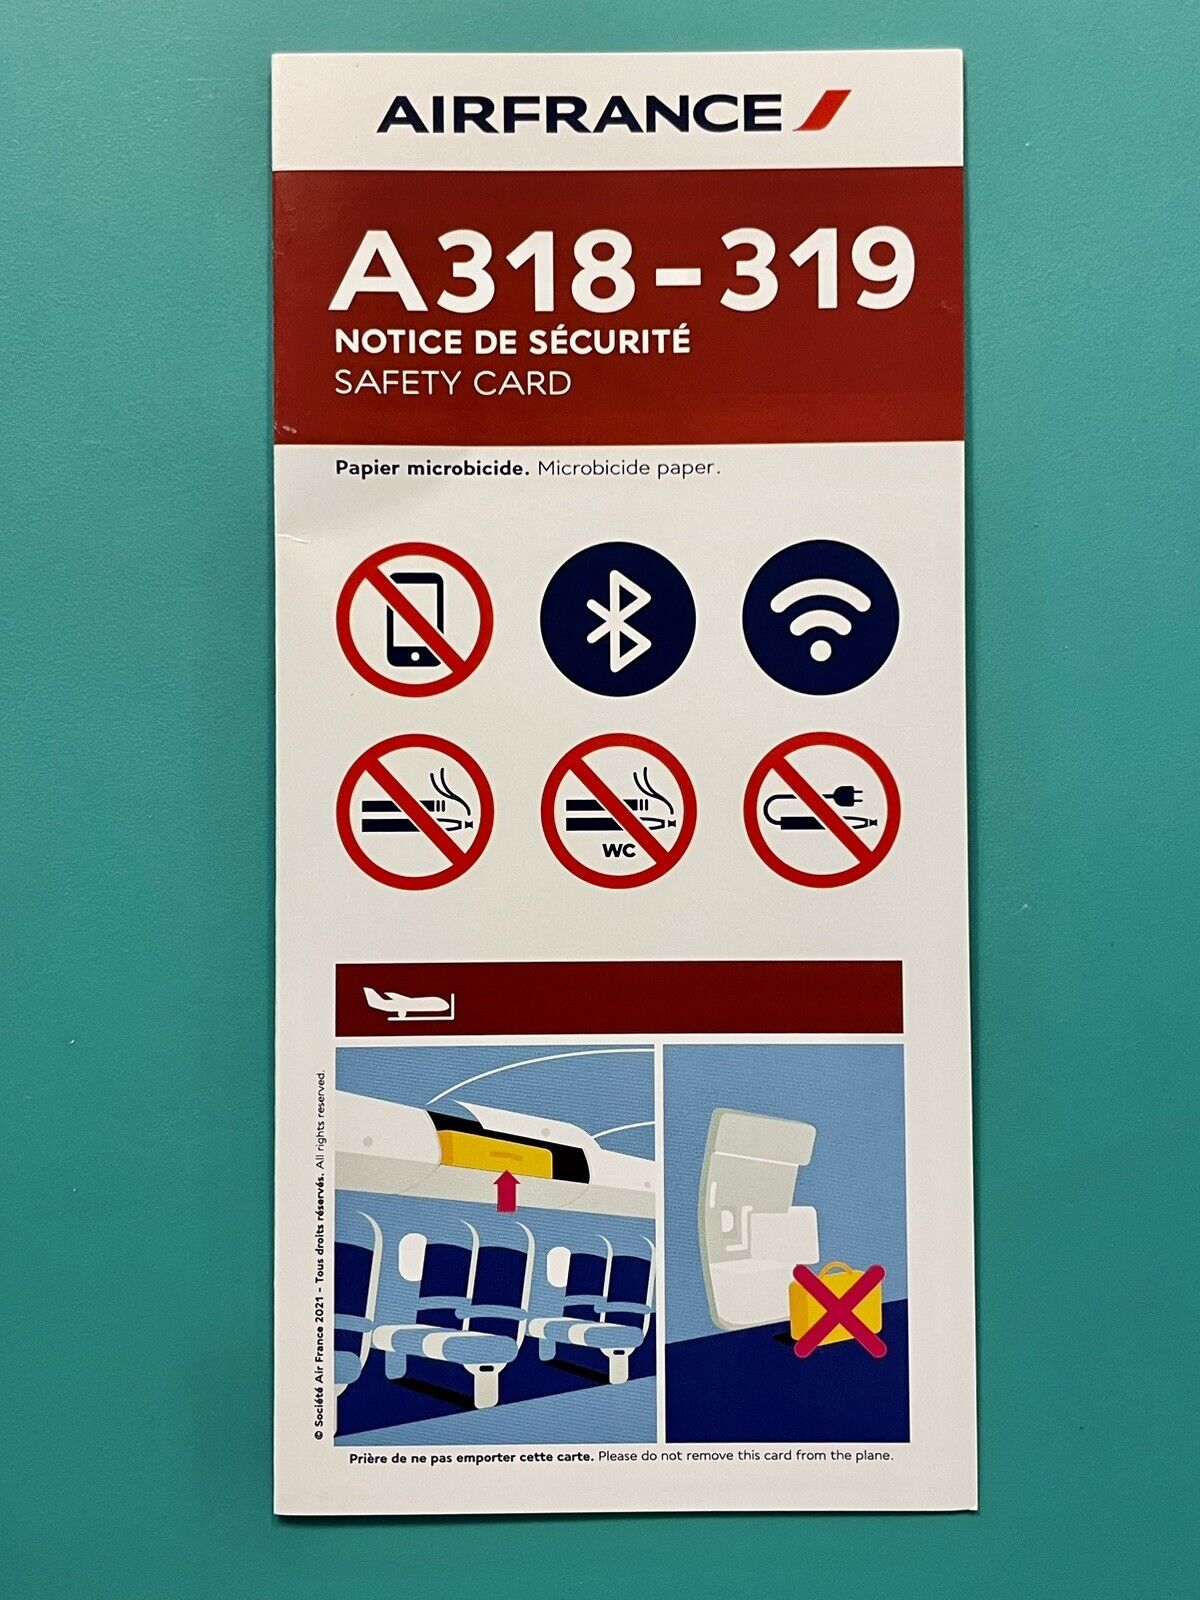 2022 AIR FRANCE SAFETY CARD —AIRBUS 318